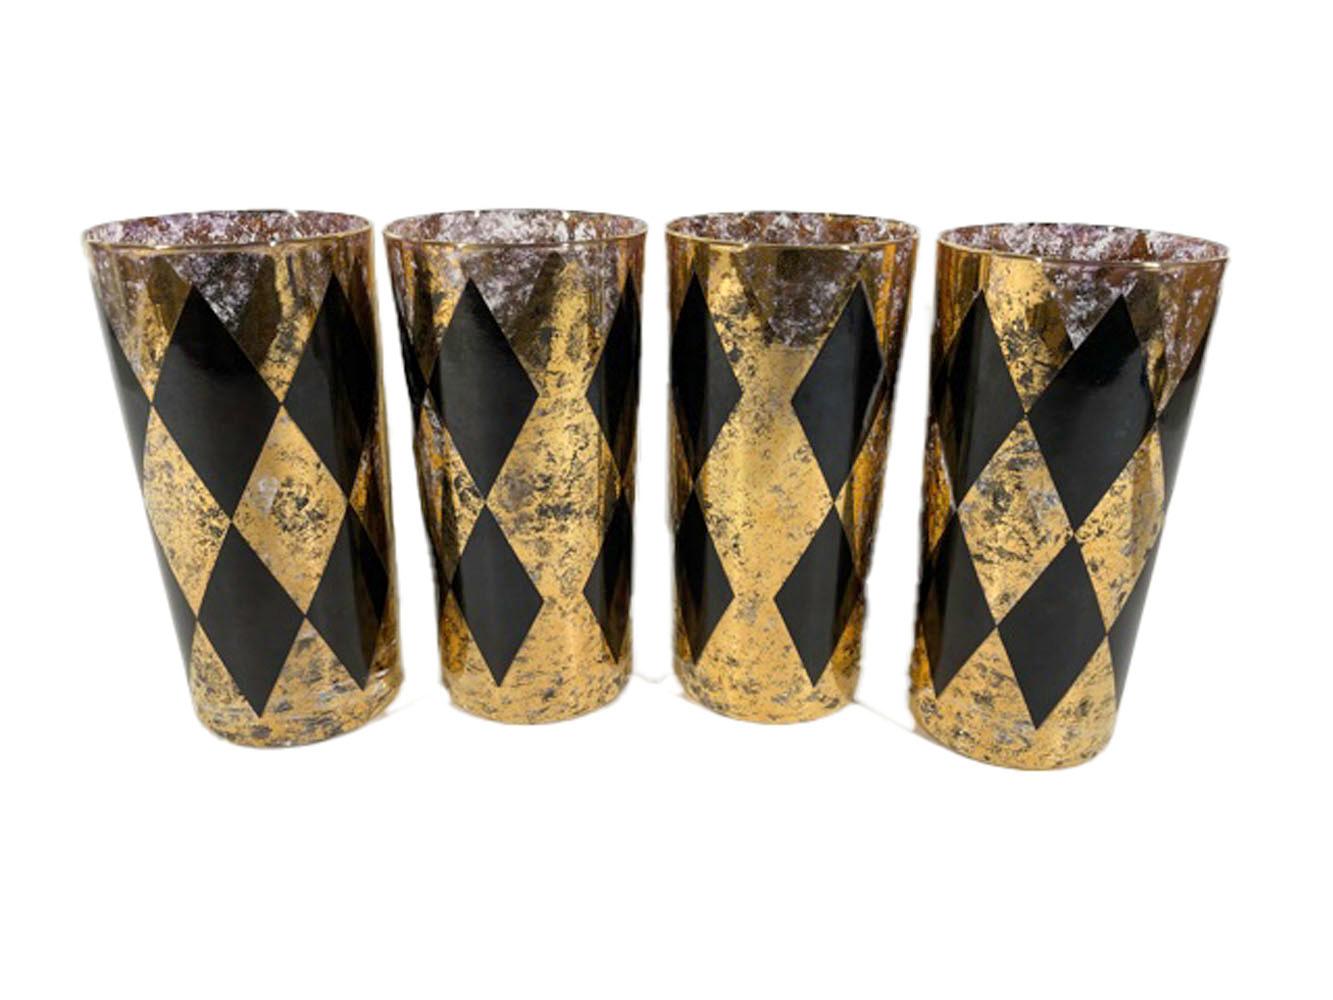 Vintage set of 8 highball glasses with a vertical diamond pattern of black enamel on a mottled gold ground.